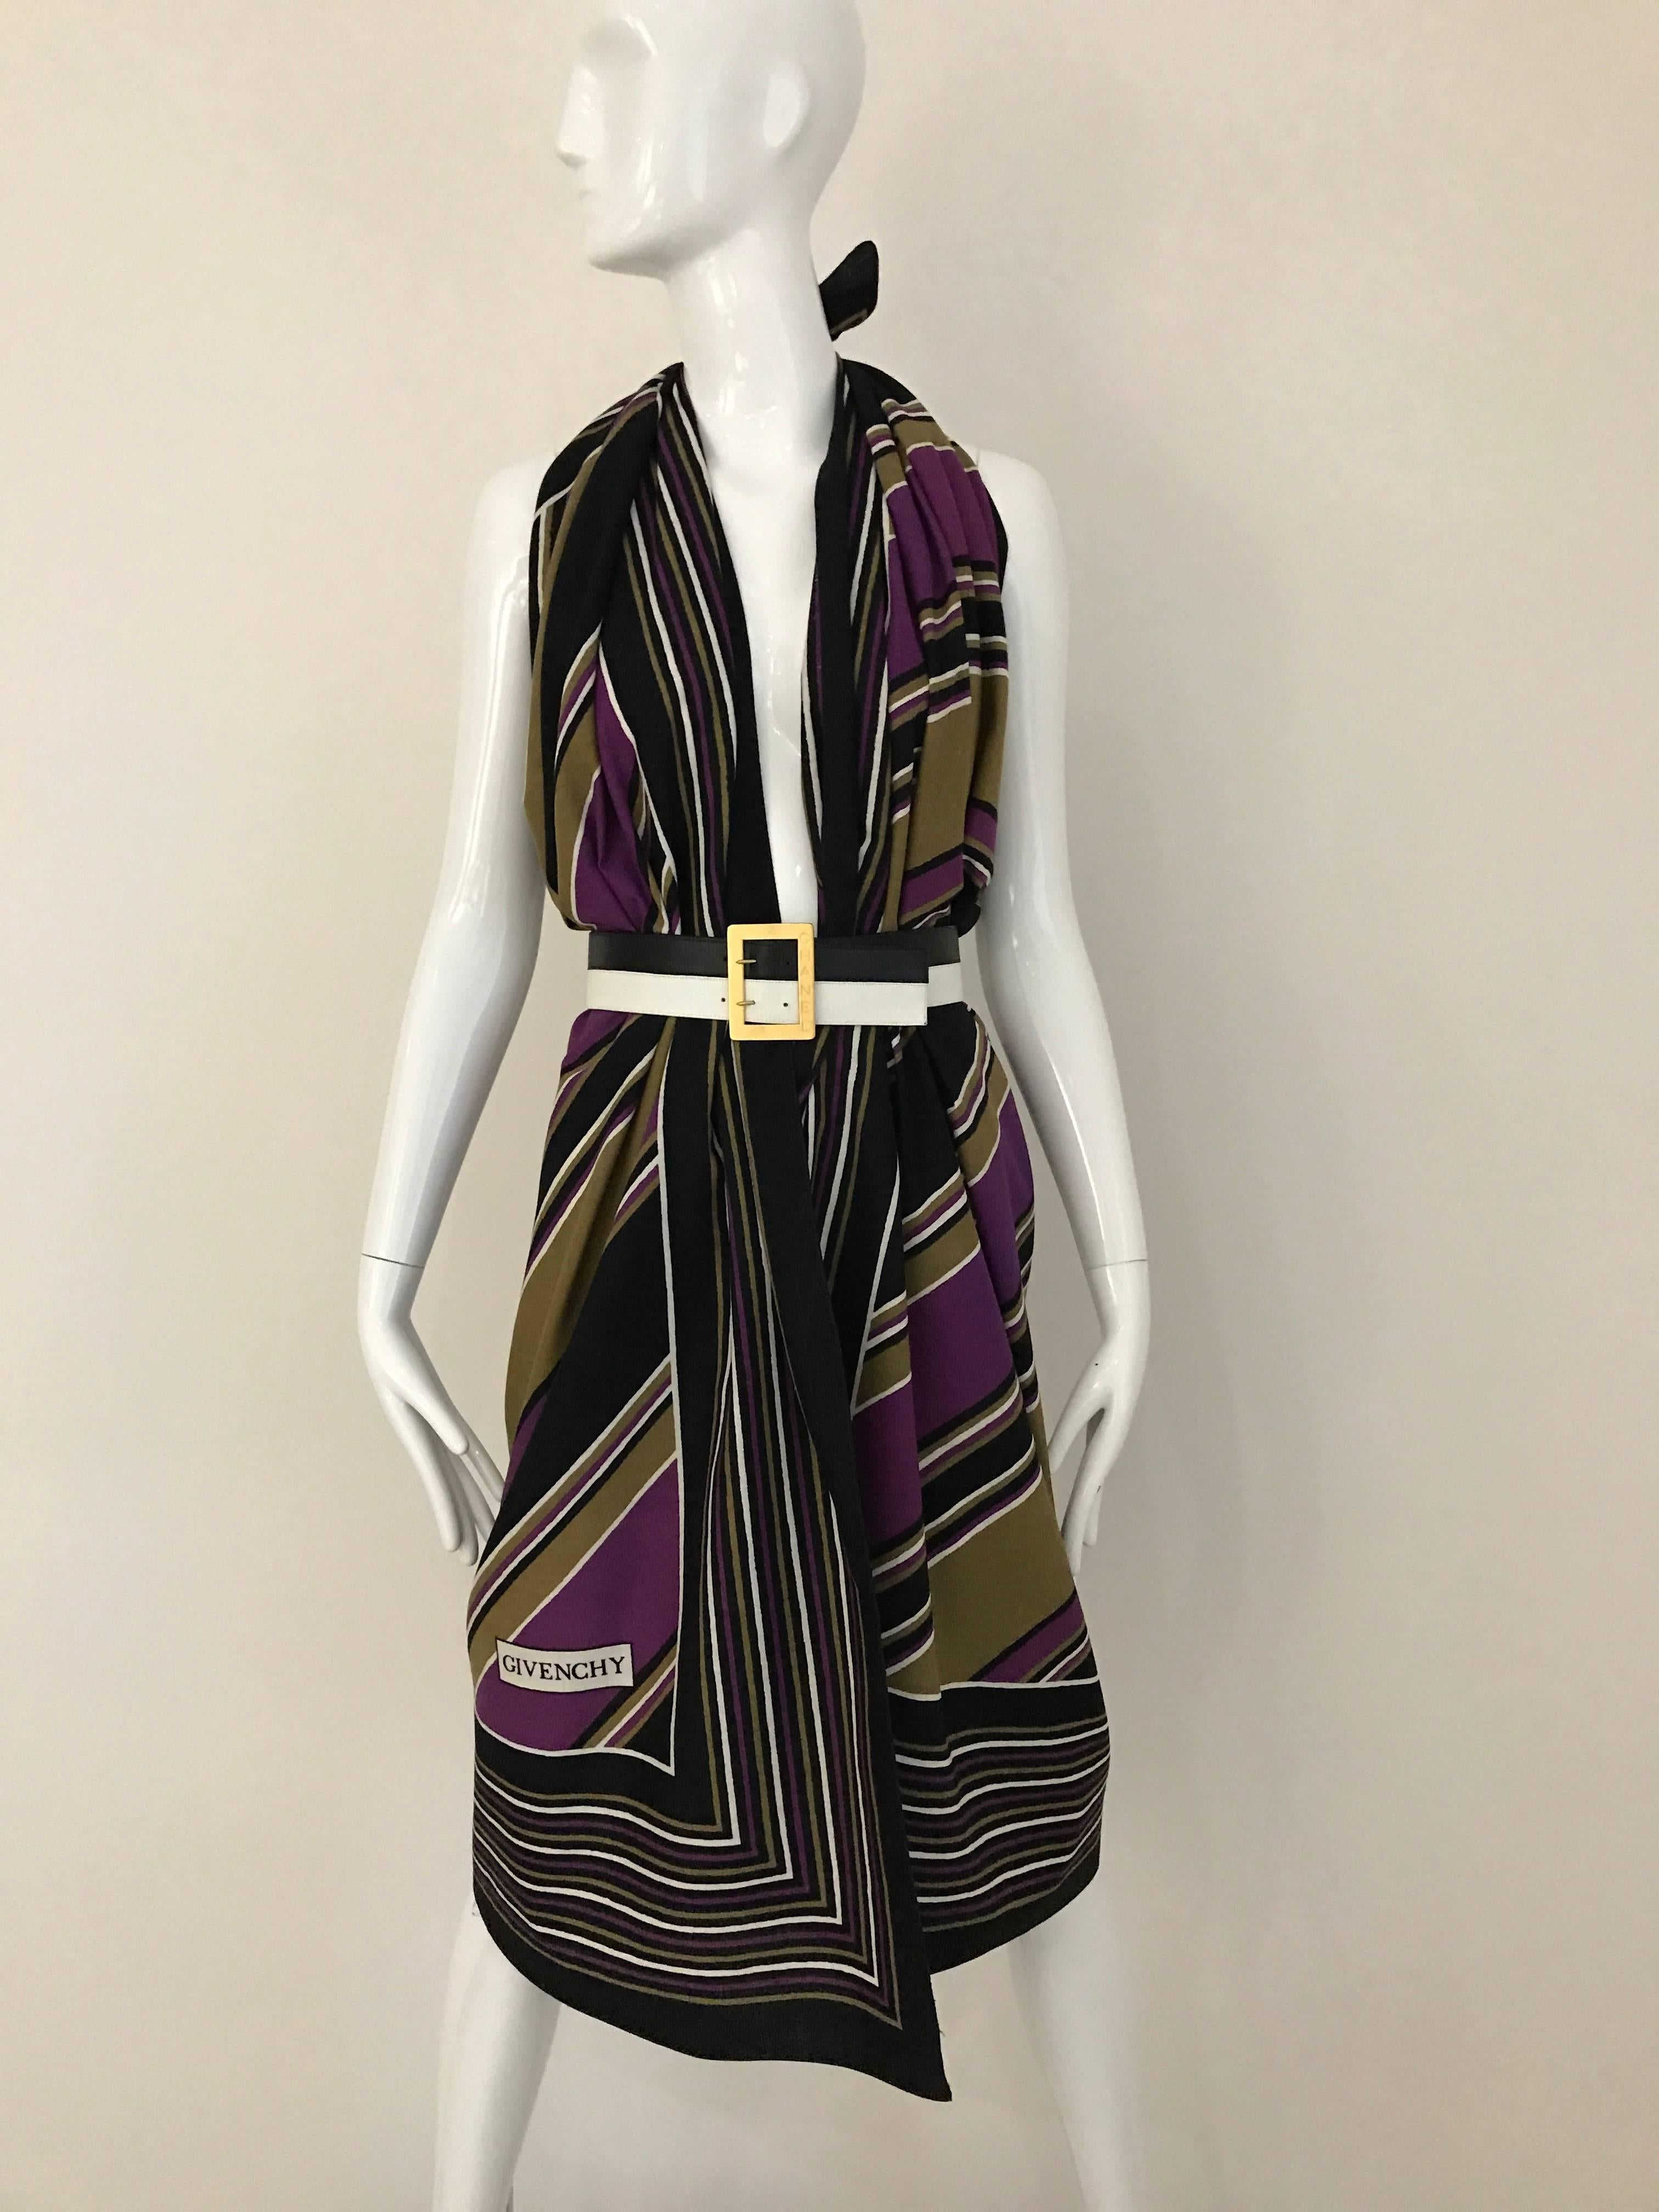 Oversized 70s Givenchy Oversized Cotton Scarf or shawl in Purple, Black, white and taupe striped diagonal print.  Scarf can be worn as Halter Dress for beach cover up. As seen here Scarf is styled with vintage Chanel Belt available for purchase at